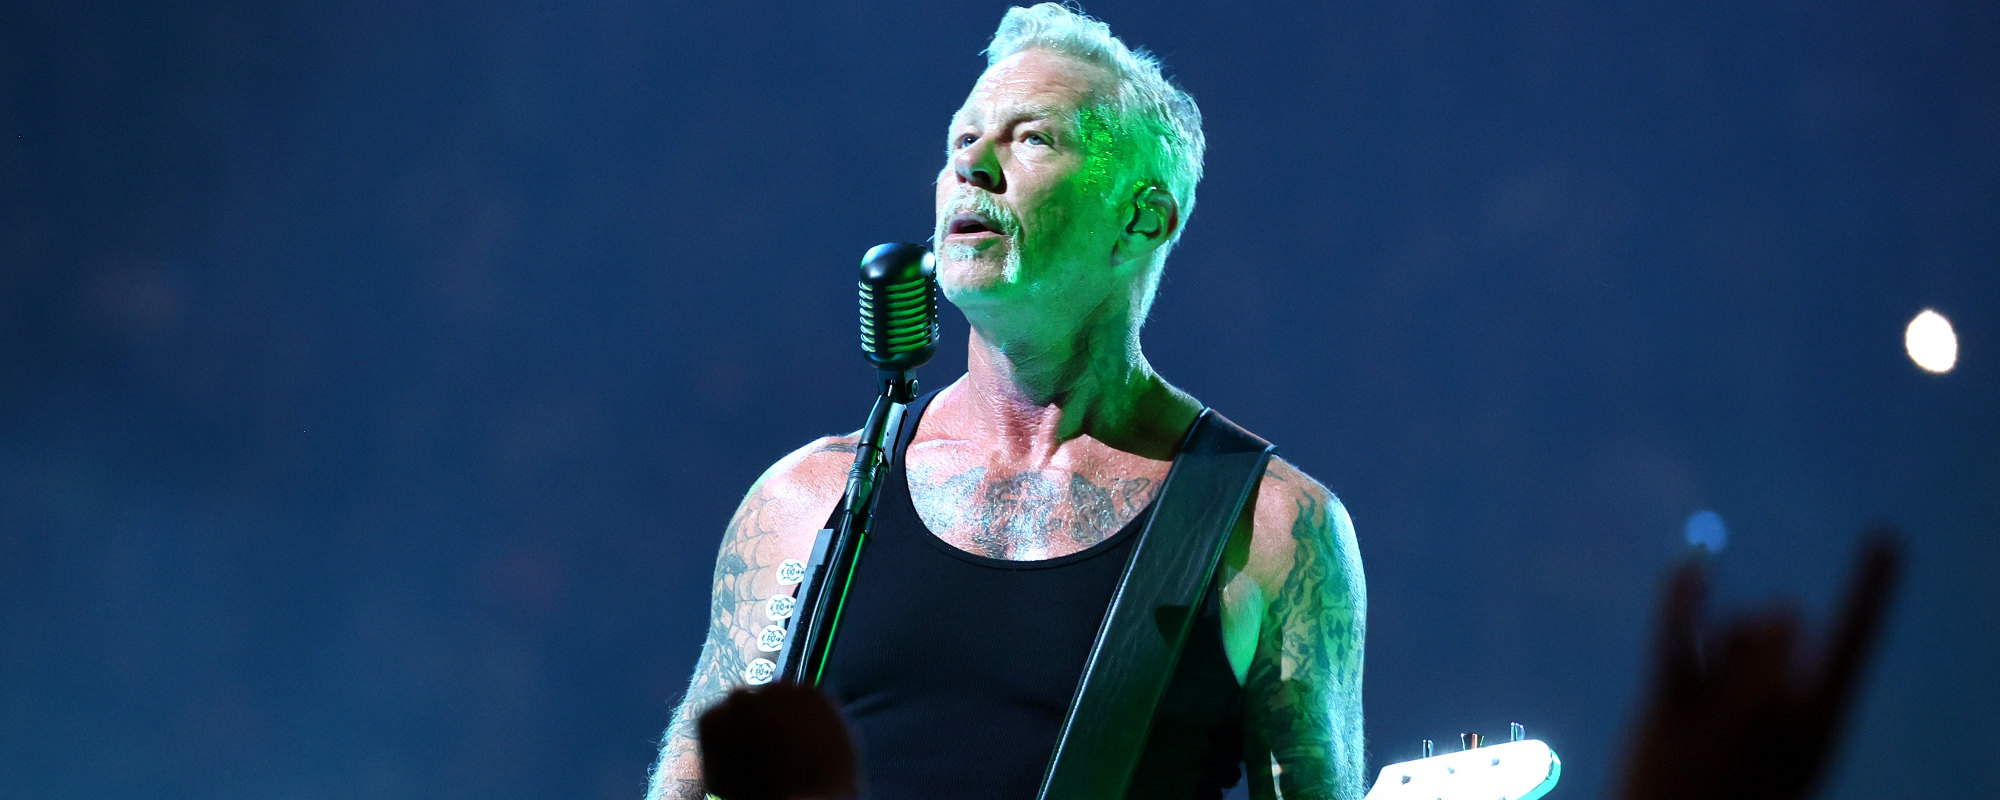 Metallica’s James Hetfield Proposes Unique New Microphone Feature to Fight Dehydration